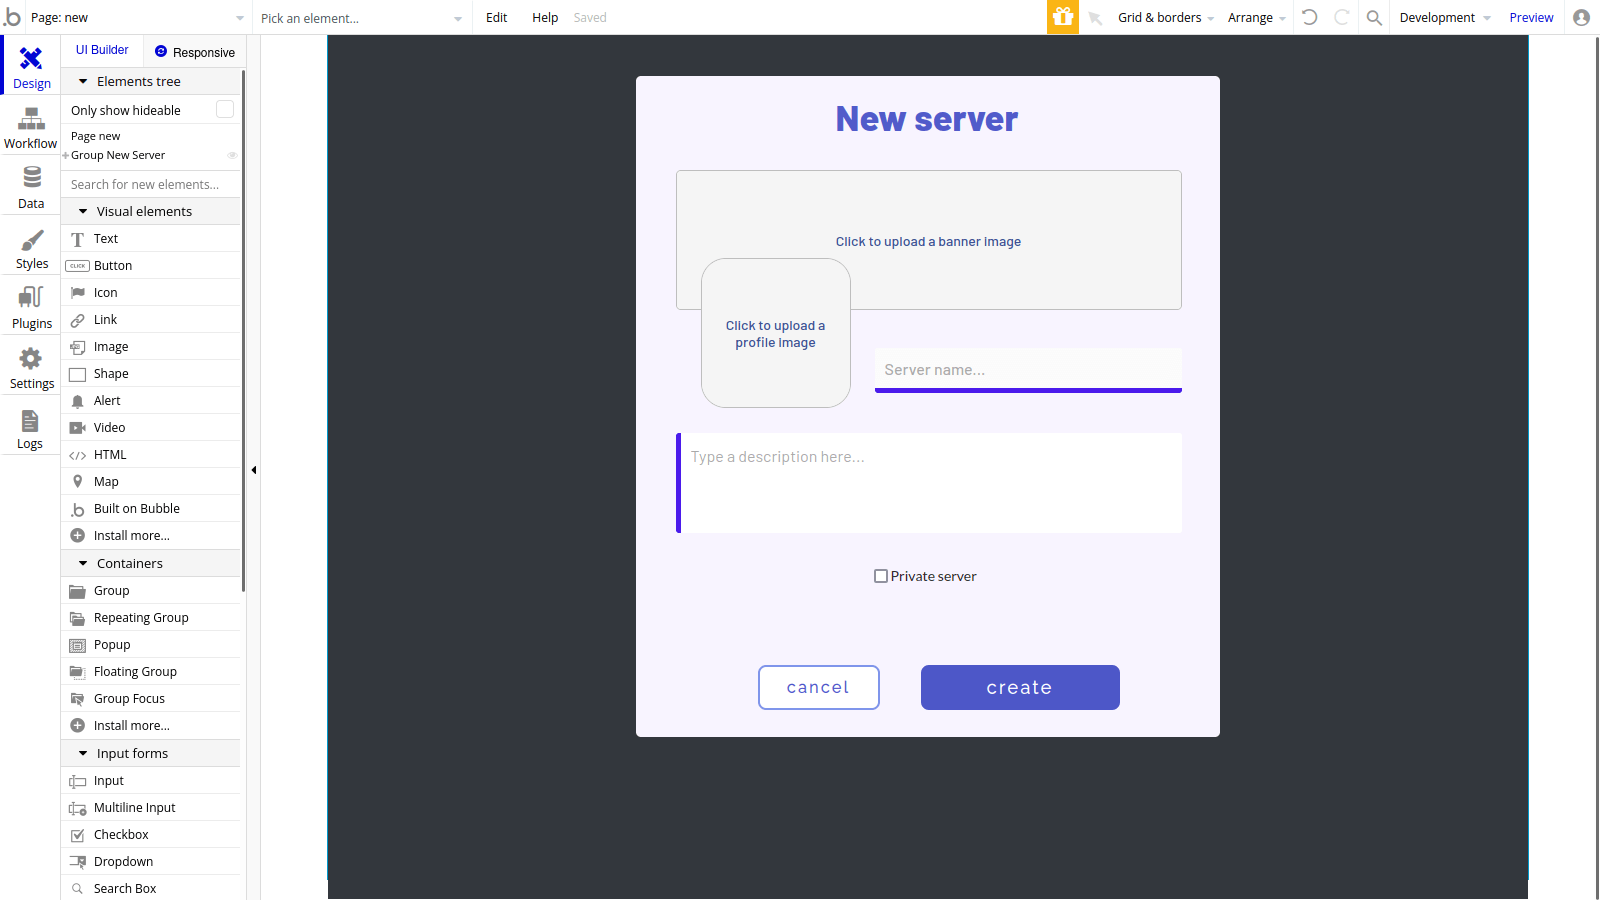 Sample New Server page in Discord clone.